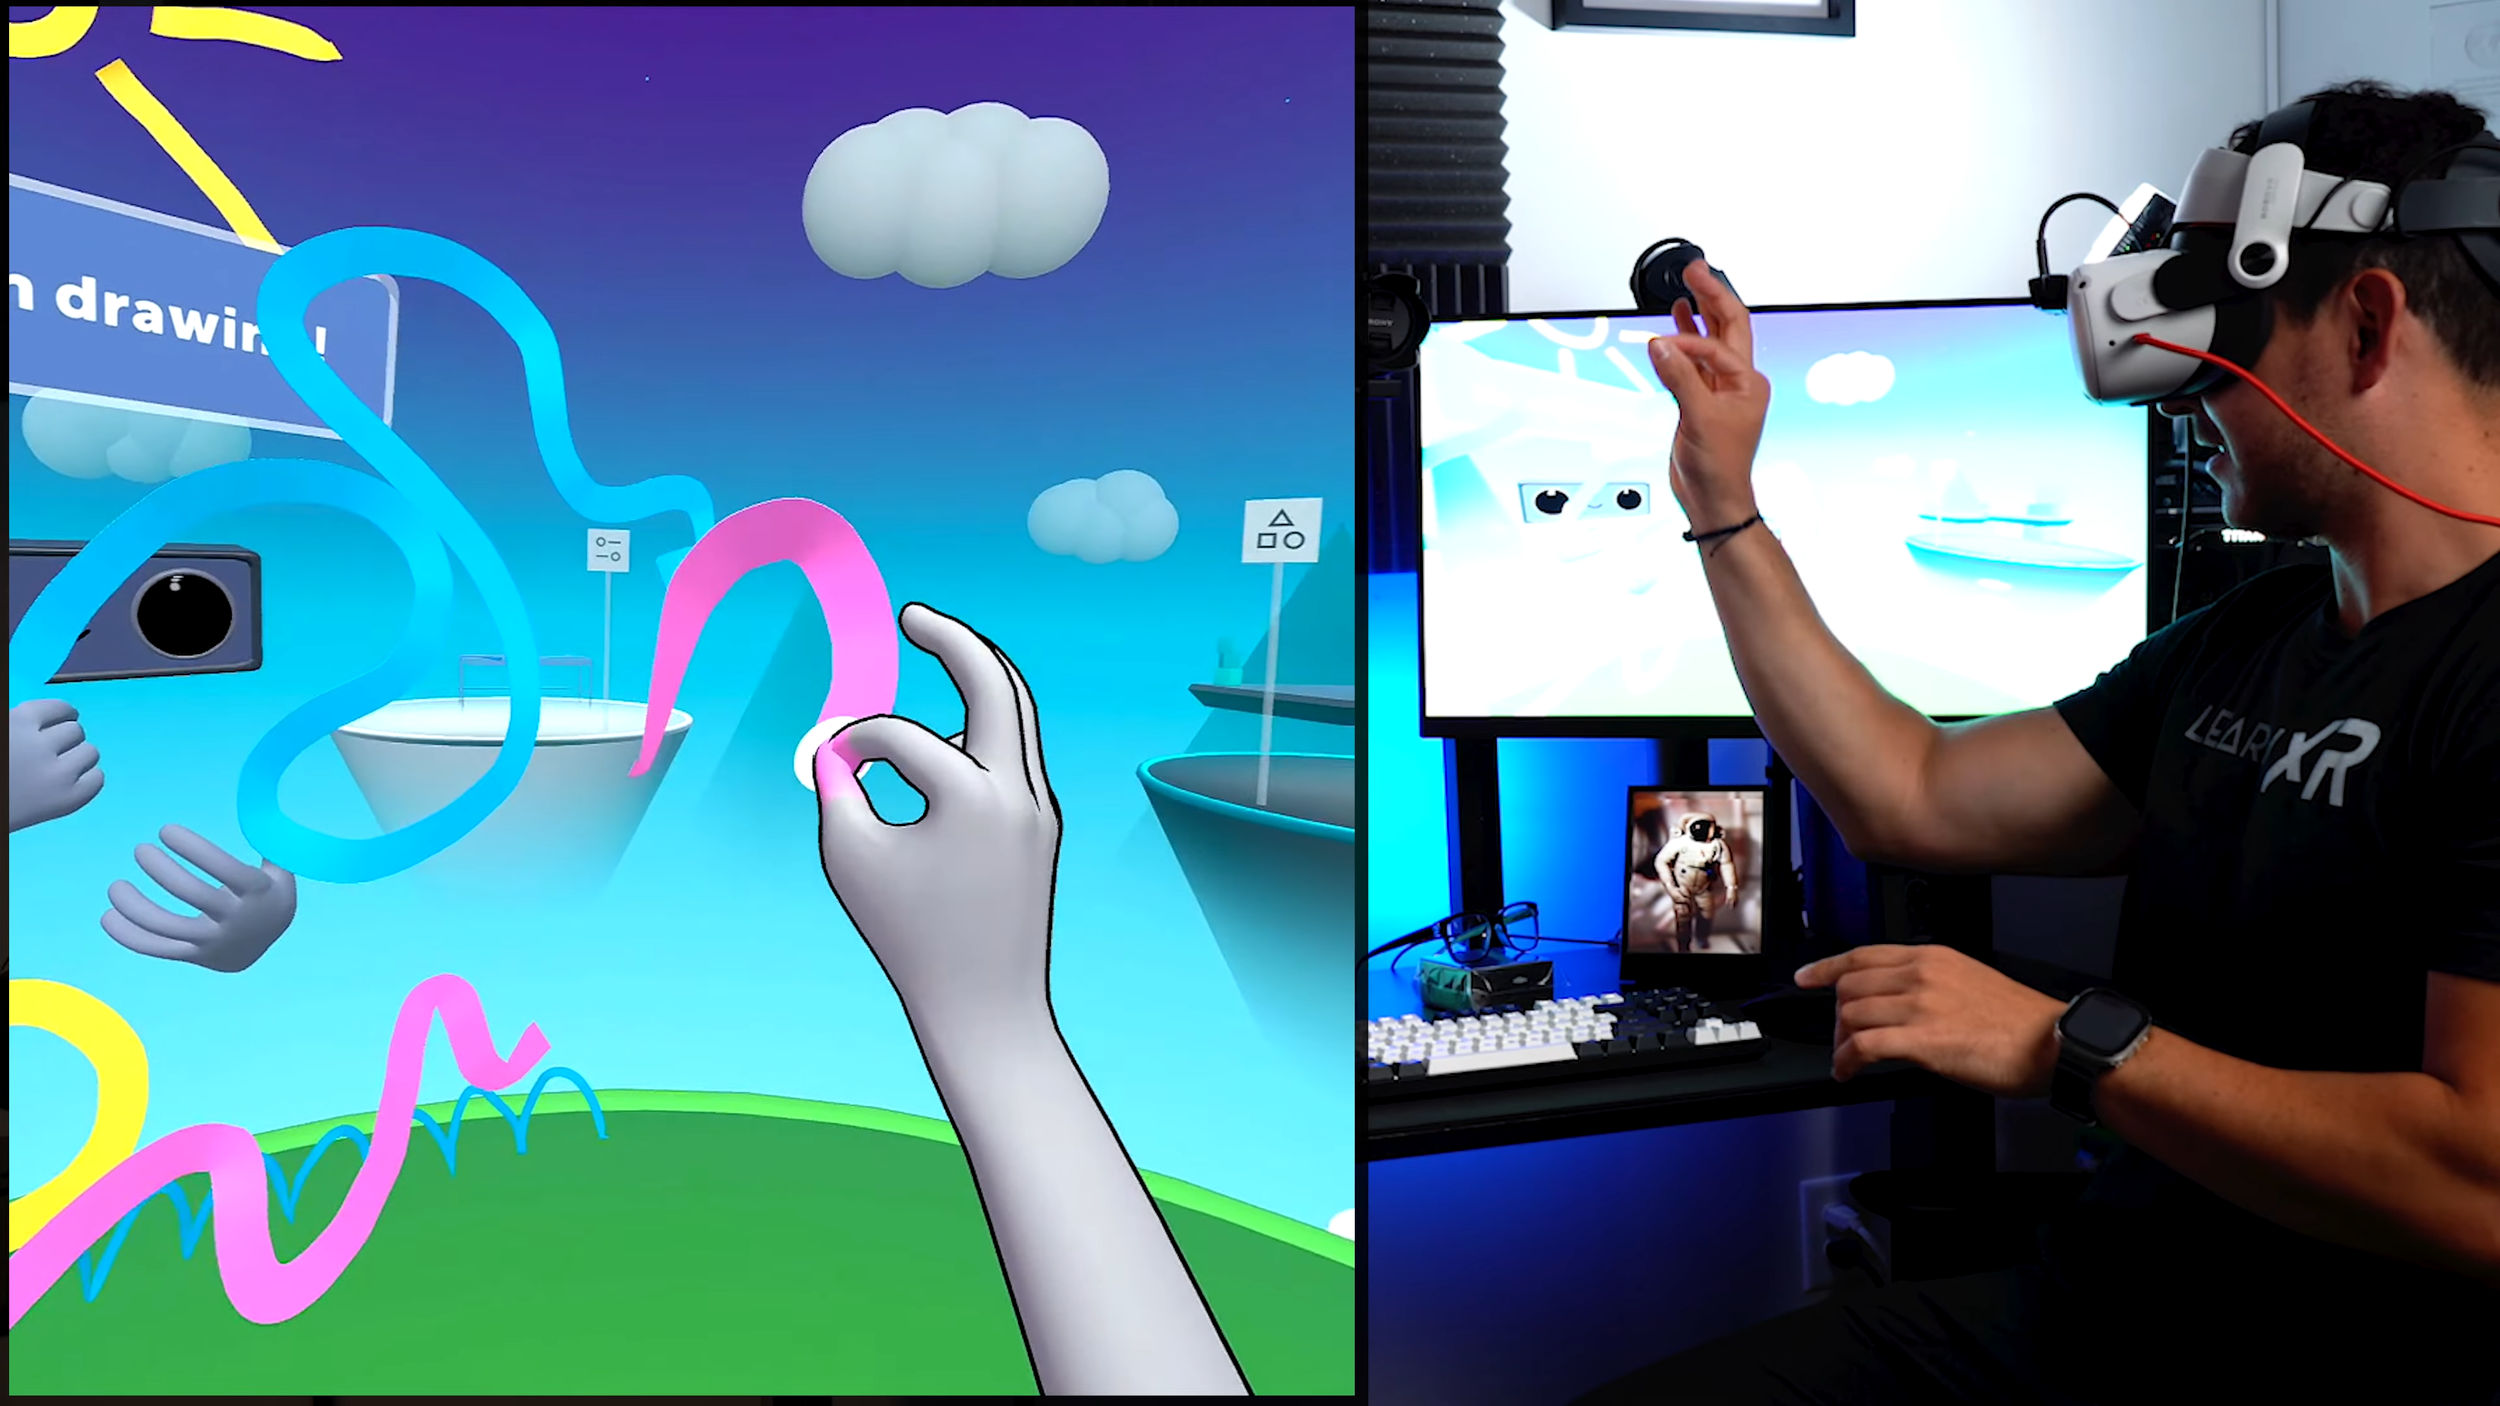 Ultraleap Leap Motion Controller 2 Is Here! (Specs, Demos, & Dev Tools) 4-7 screenshot.png